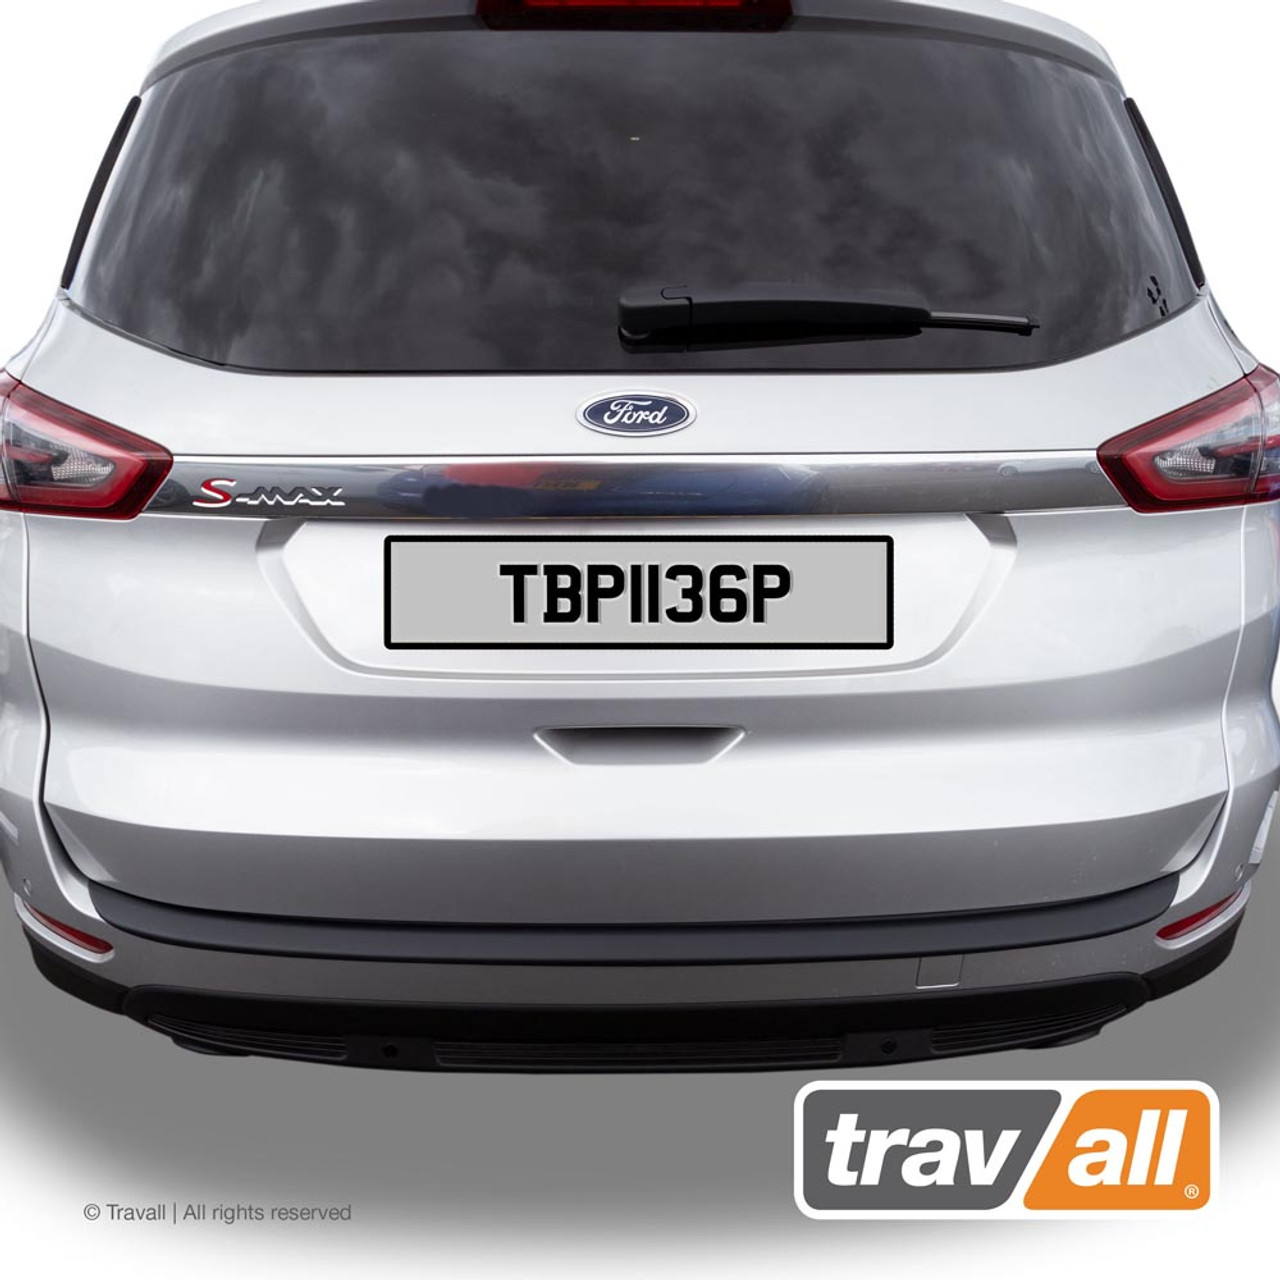 Plastic Bumper Protector for Ford S Max 2015 onwards